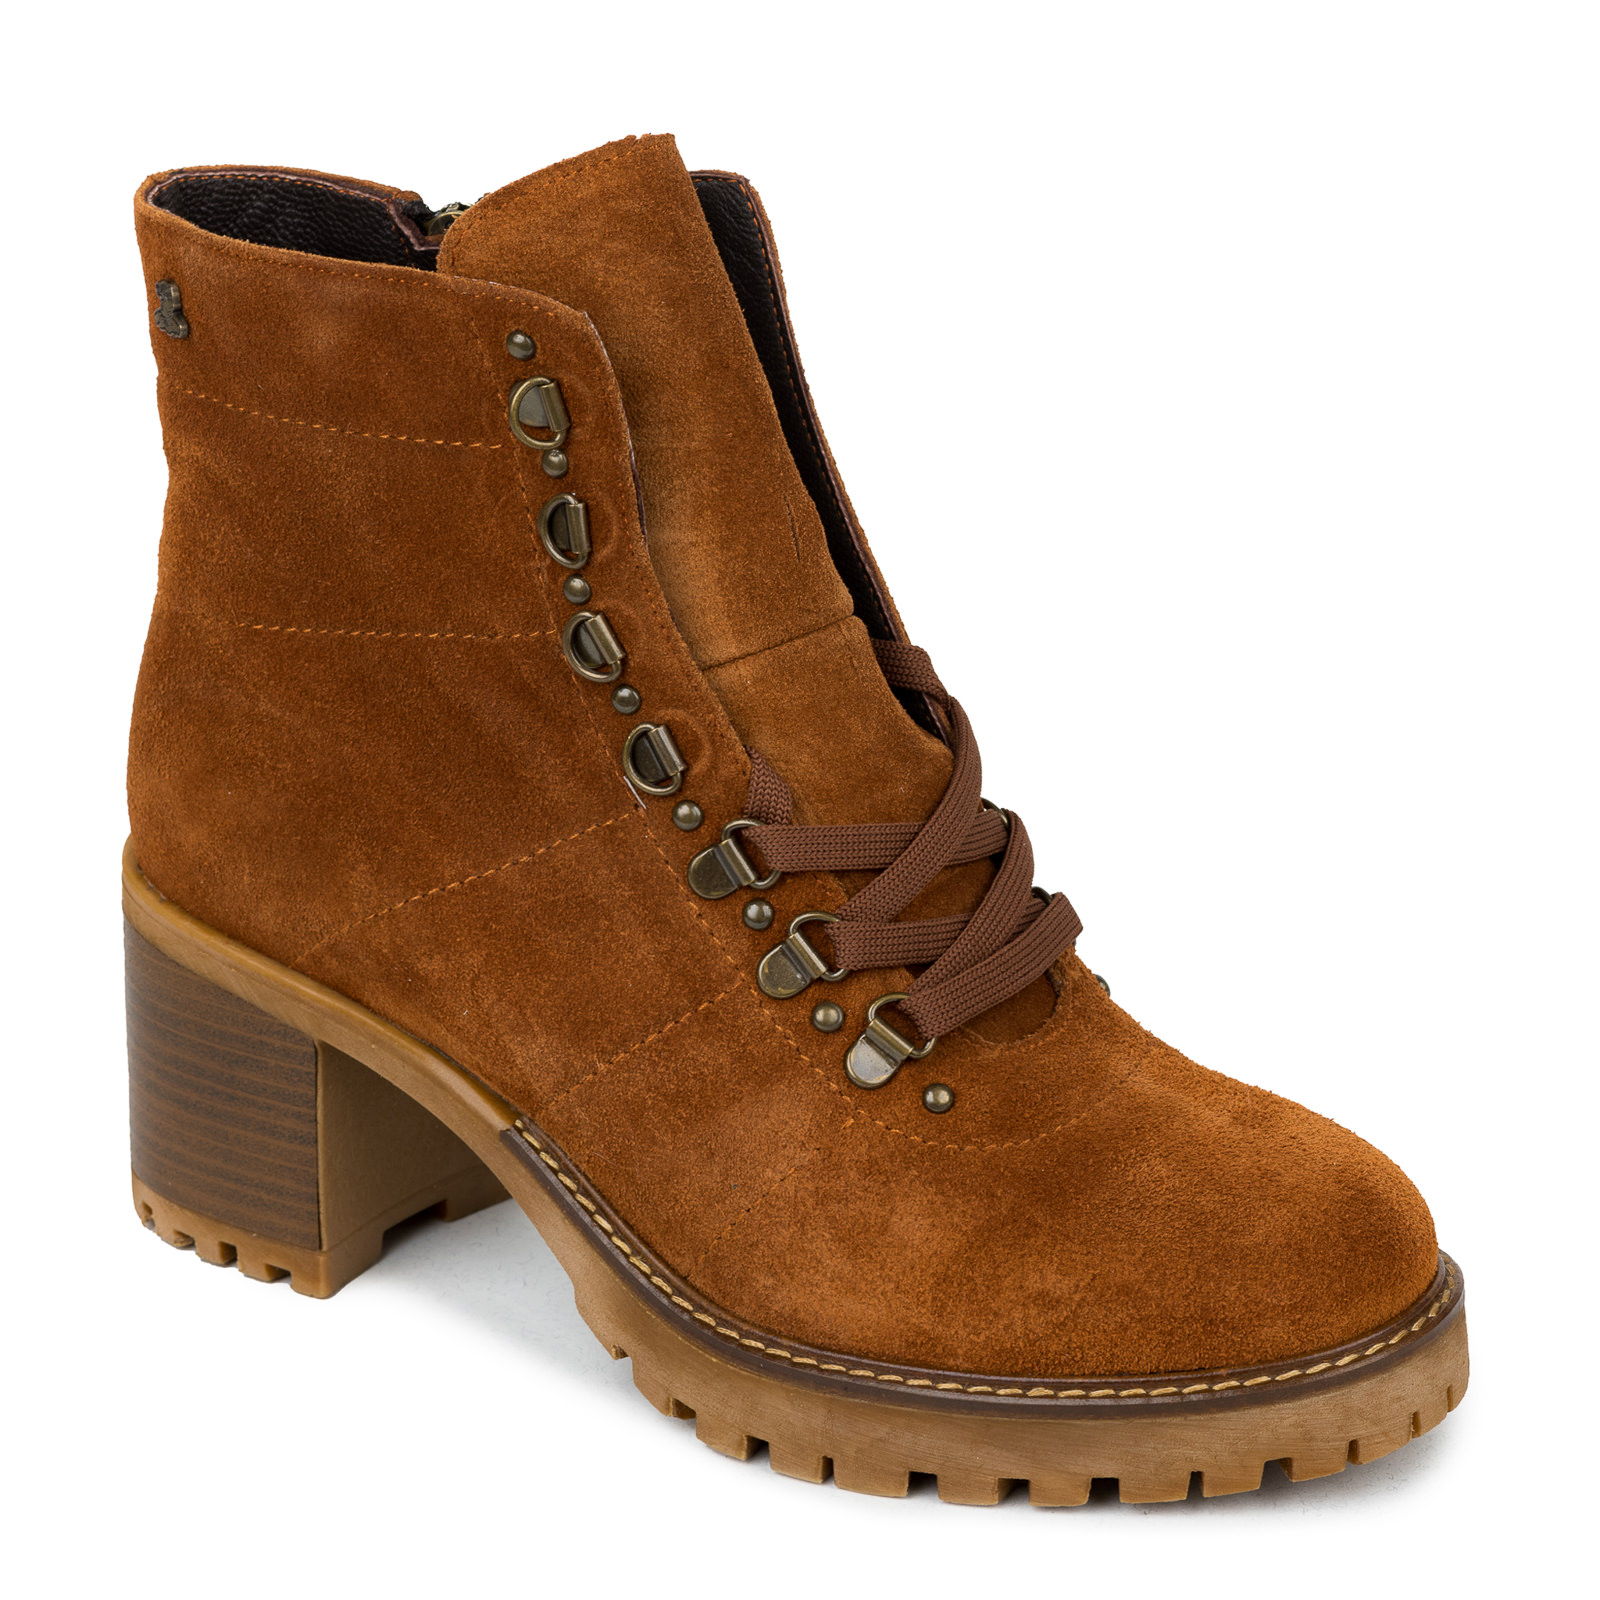 Leather ankle boots B434 - CAMEL